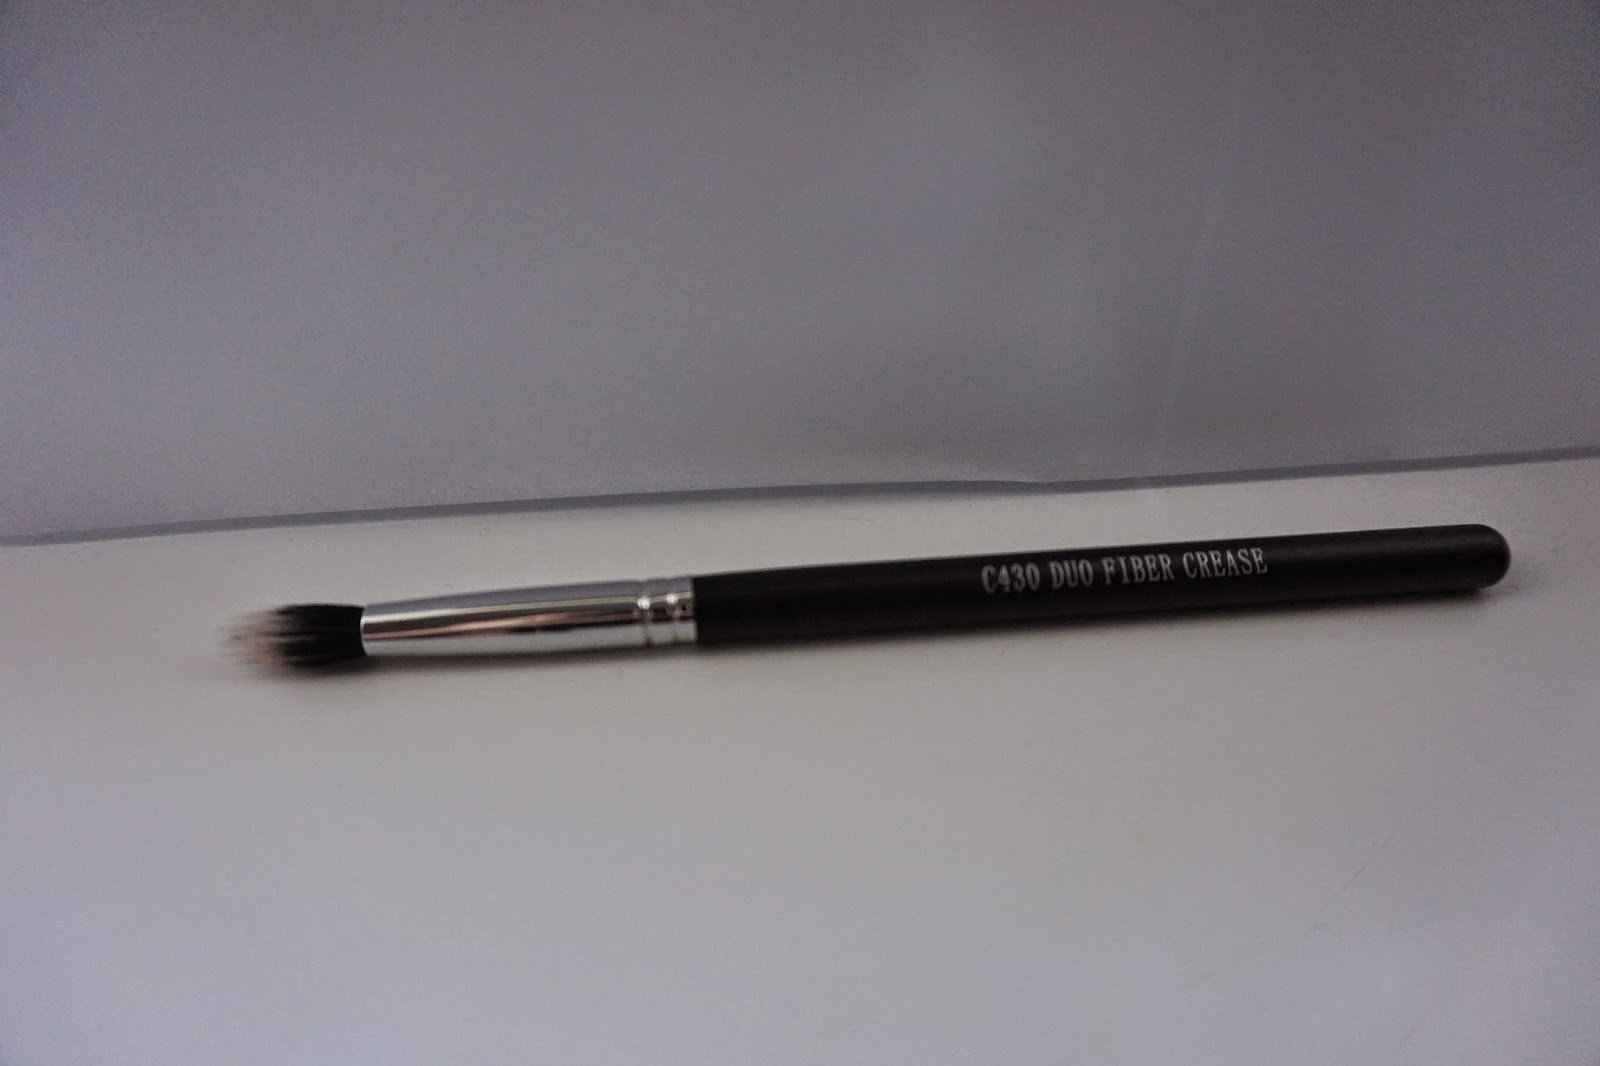 Crown Brush Review C430 Duo Fibre Crease - Dusty Foxes Beauty